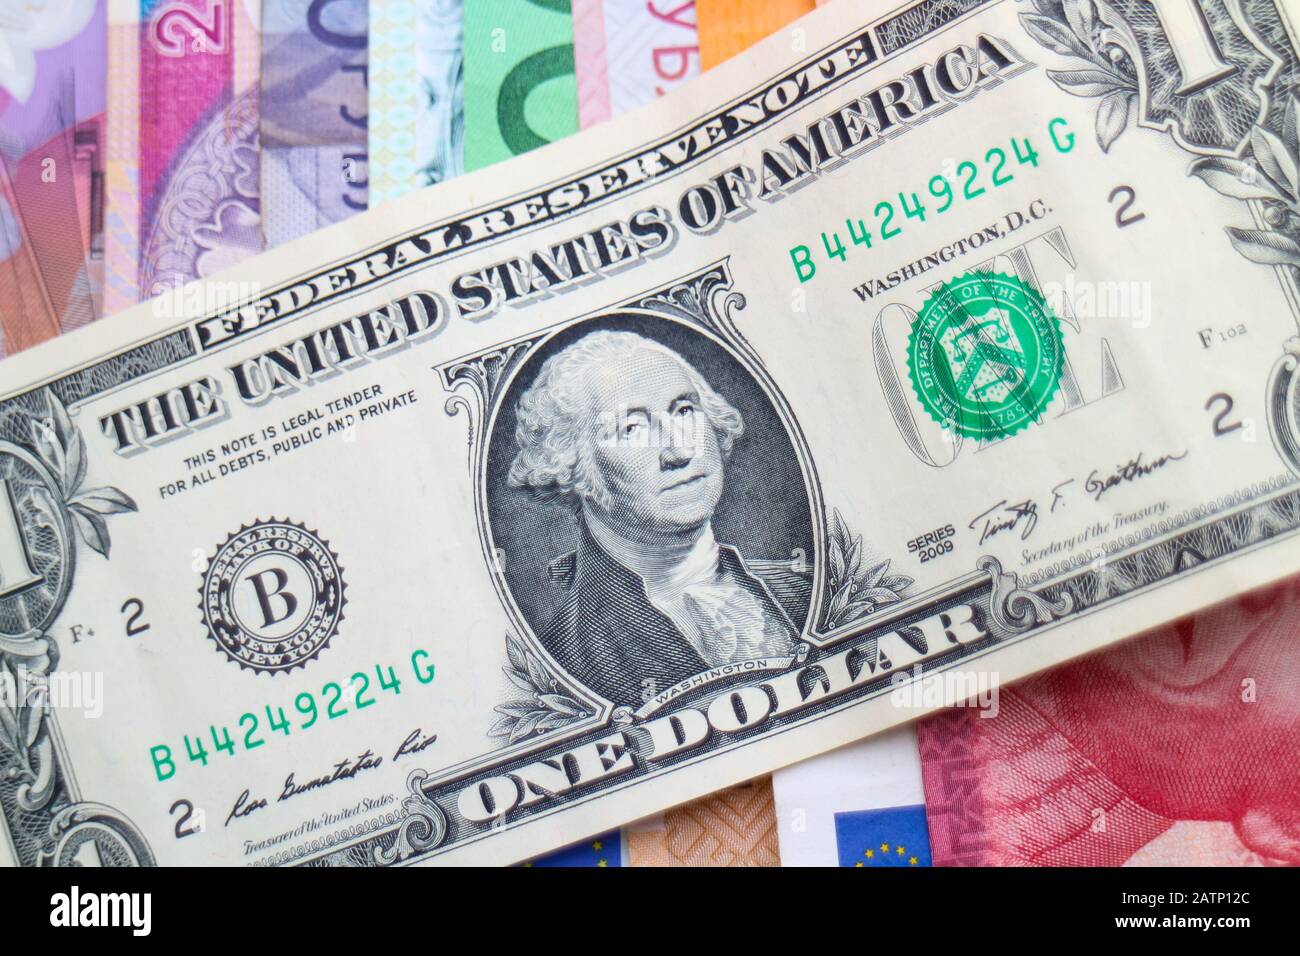 US Dollar banknote arranged diagonally on a pile of rainbow banknotes of different world currencies, including Euros, Shekels, Rand and Polish Złoty. Stock Photo